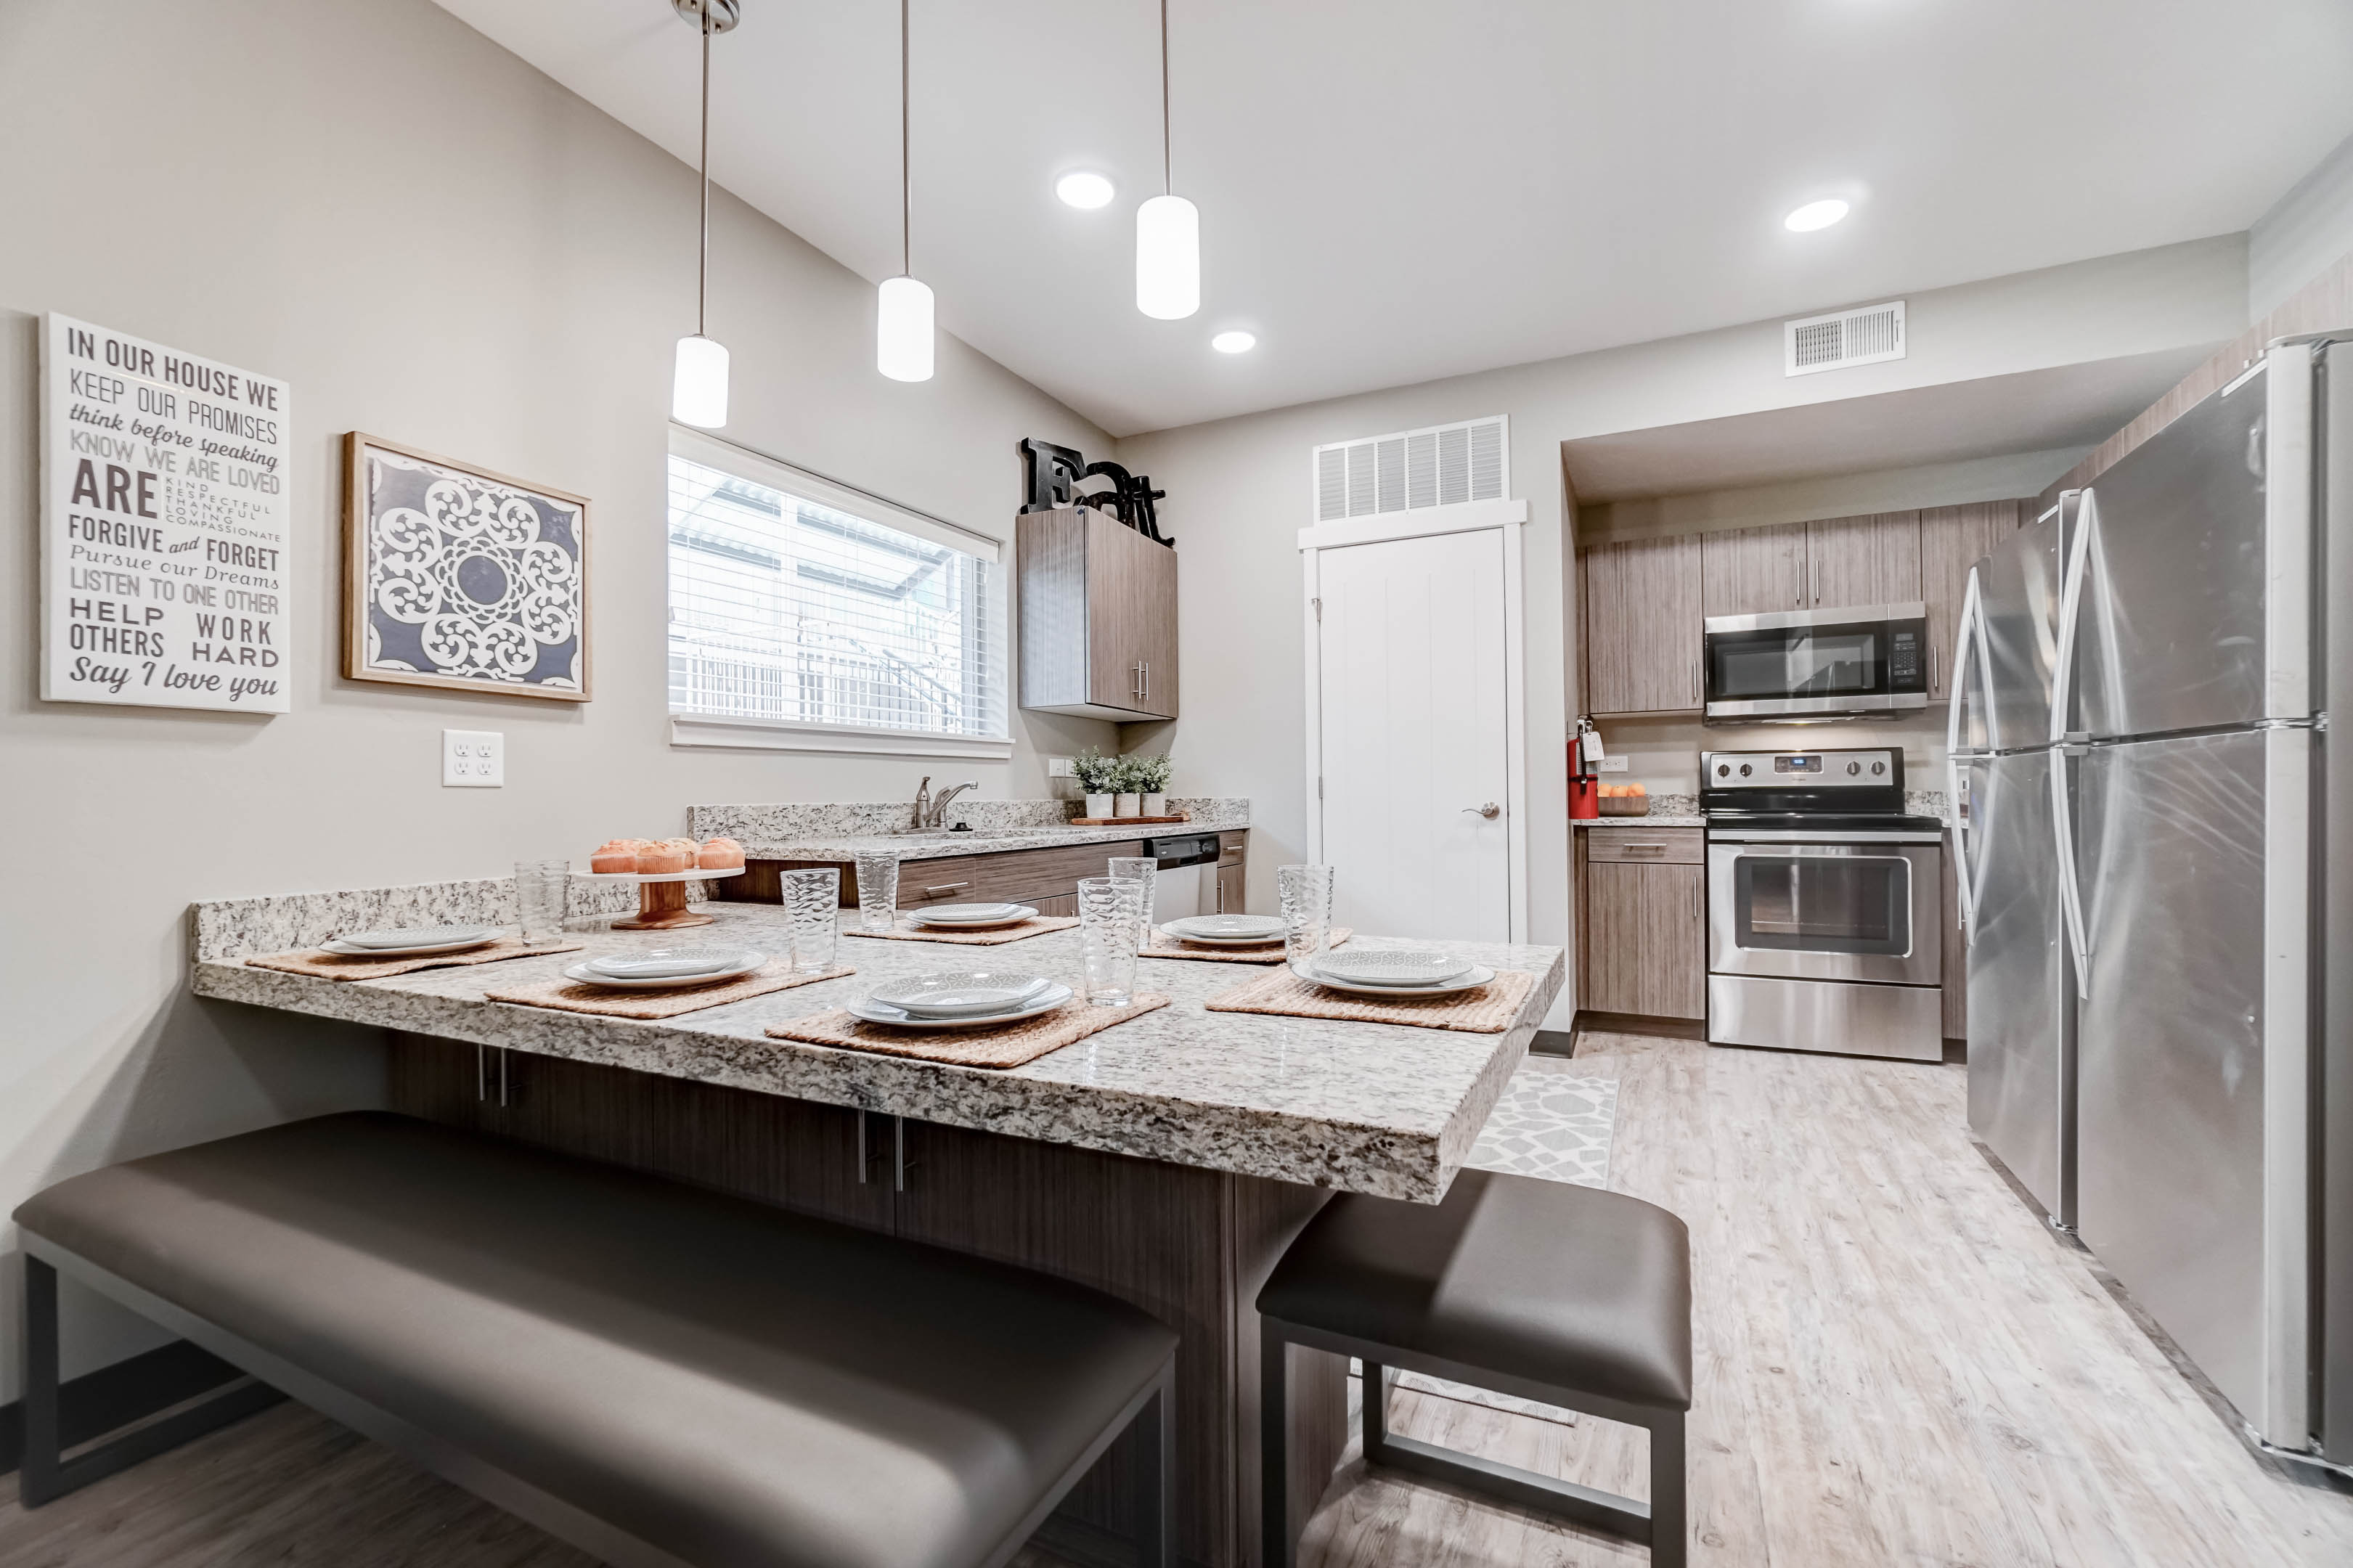 With two full-size refrigerators, granite countertops, lots of beautiful cabinets, stainless steel appliances, and a garbage disposal, the kitchen has everything you need!